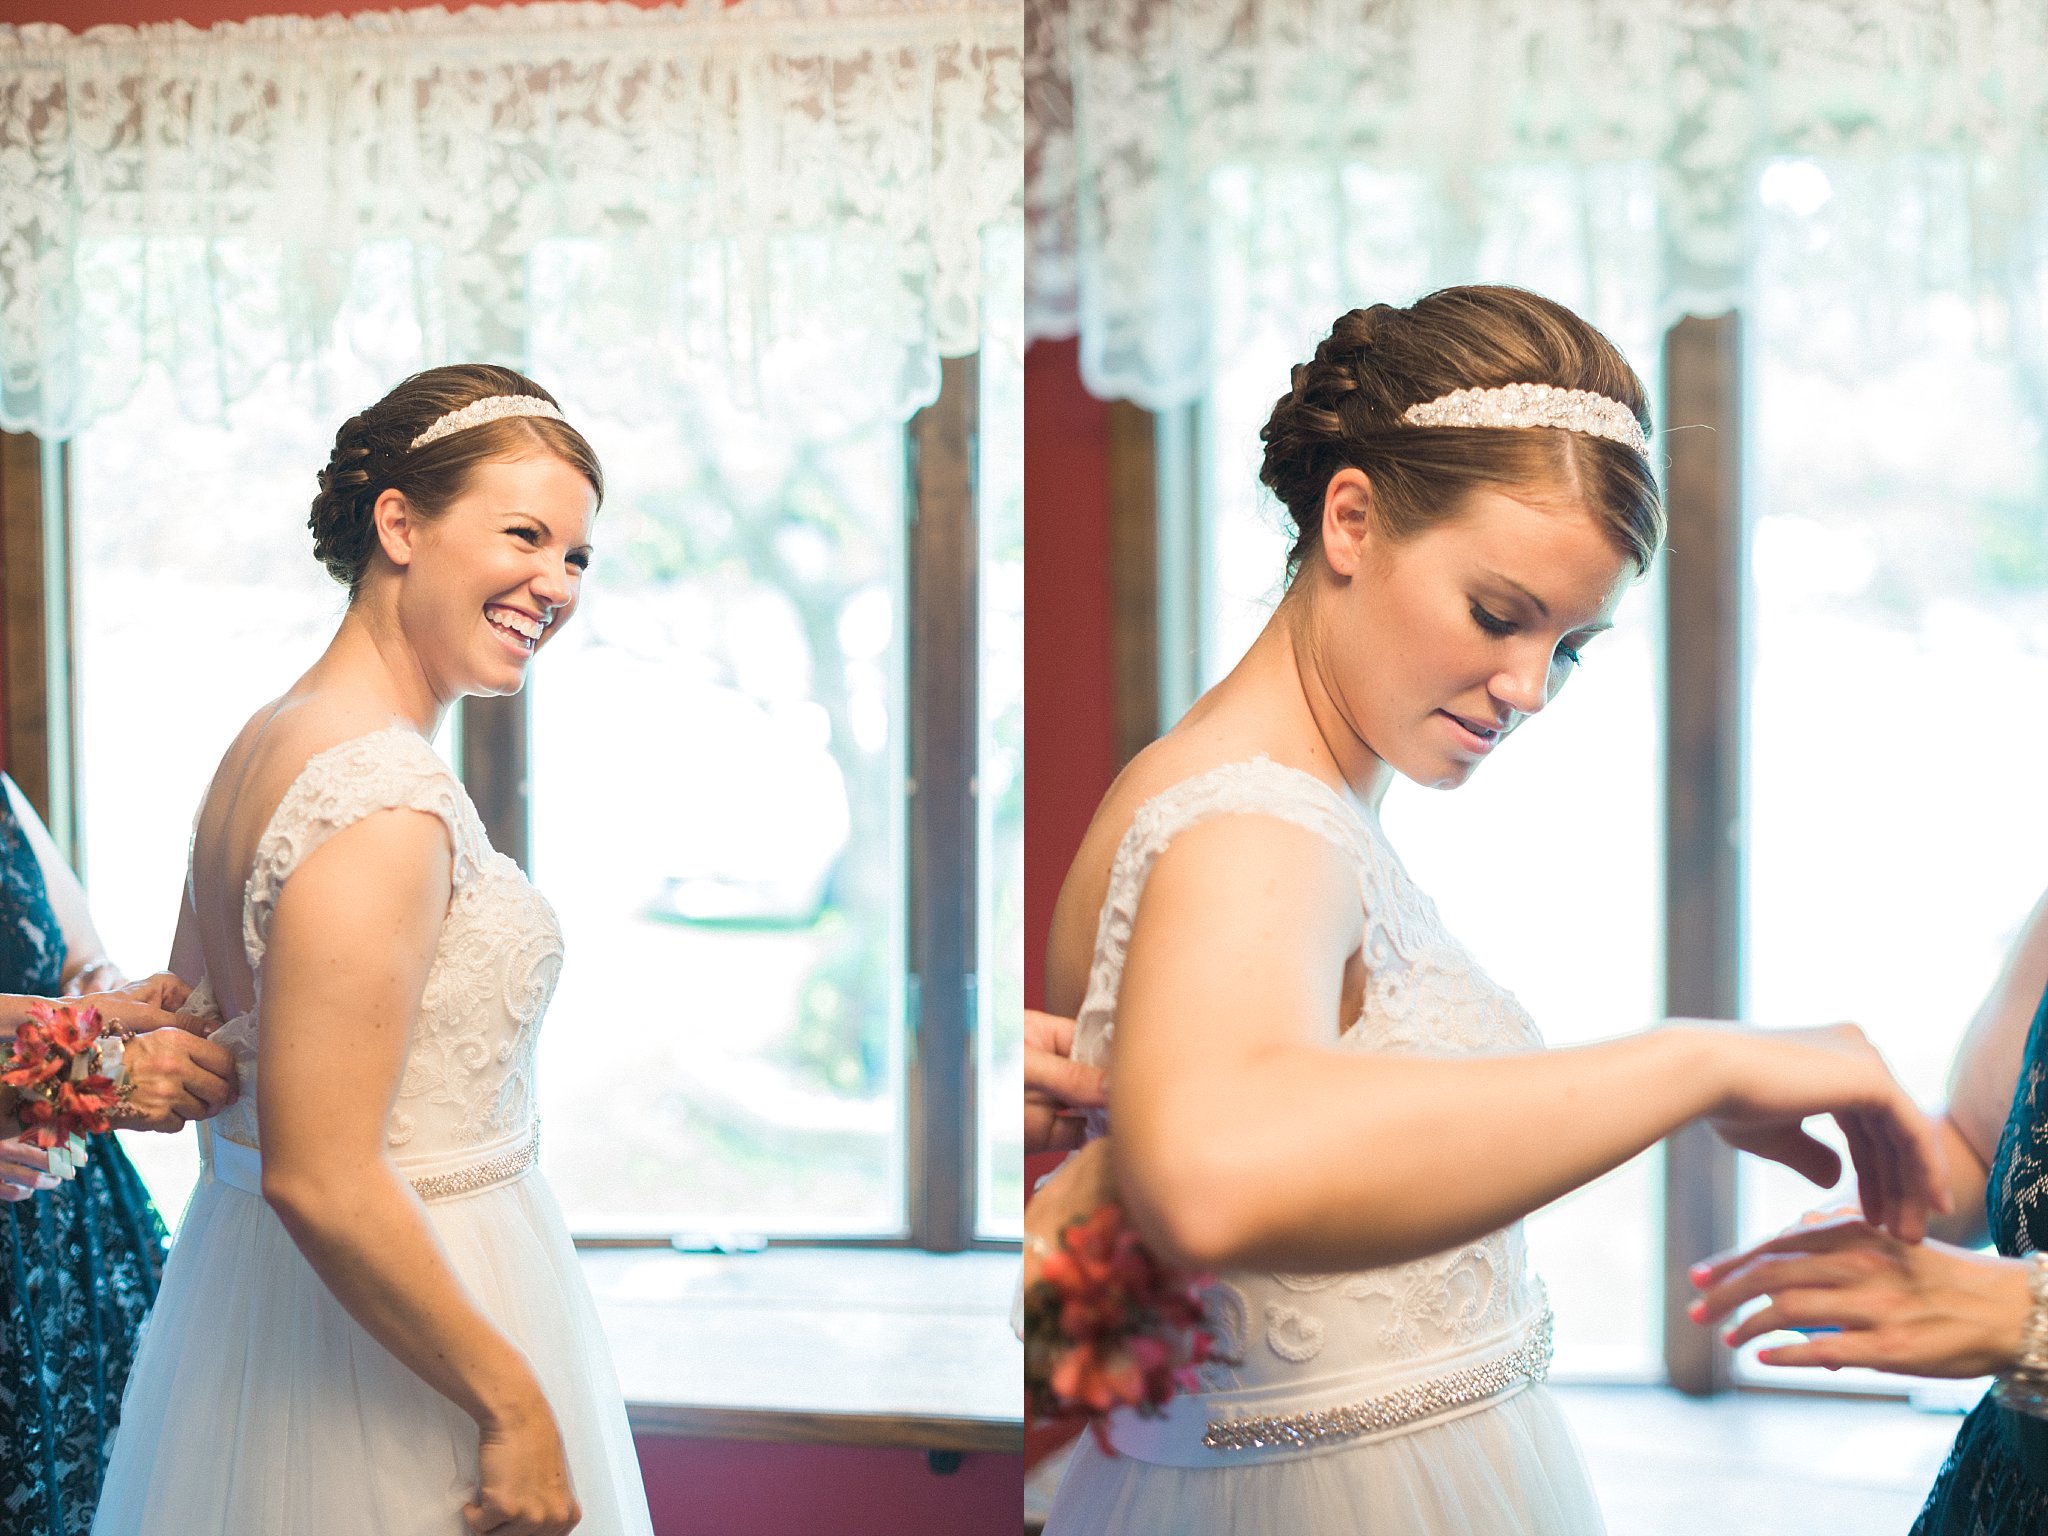 www.james-stokes.com | James Stokes Photography, LLC - bride getting ready photos by Wisconsin wedding photographer